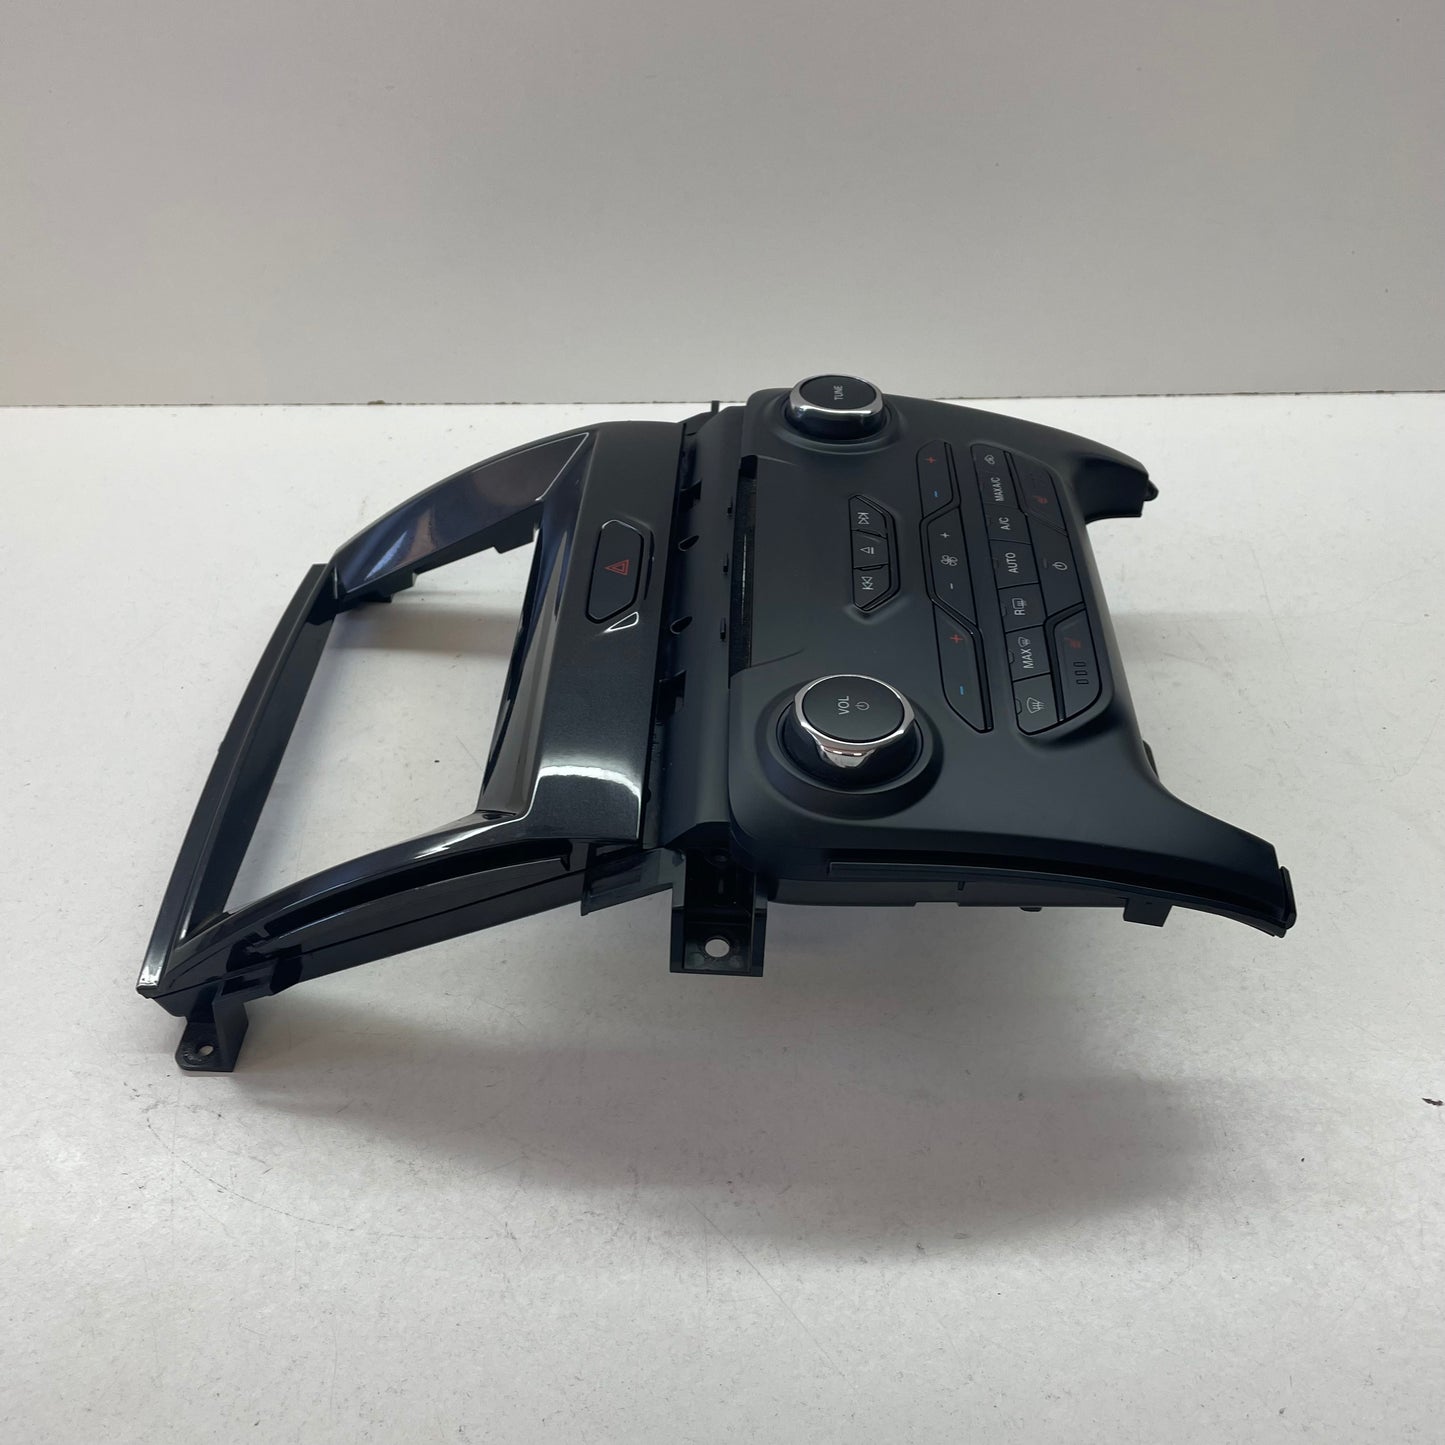 Ford Ranger Climate Controls 2015 2016 2017 2018 2019 2020 2021 2022